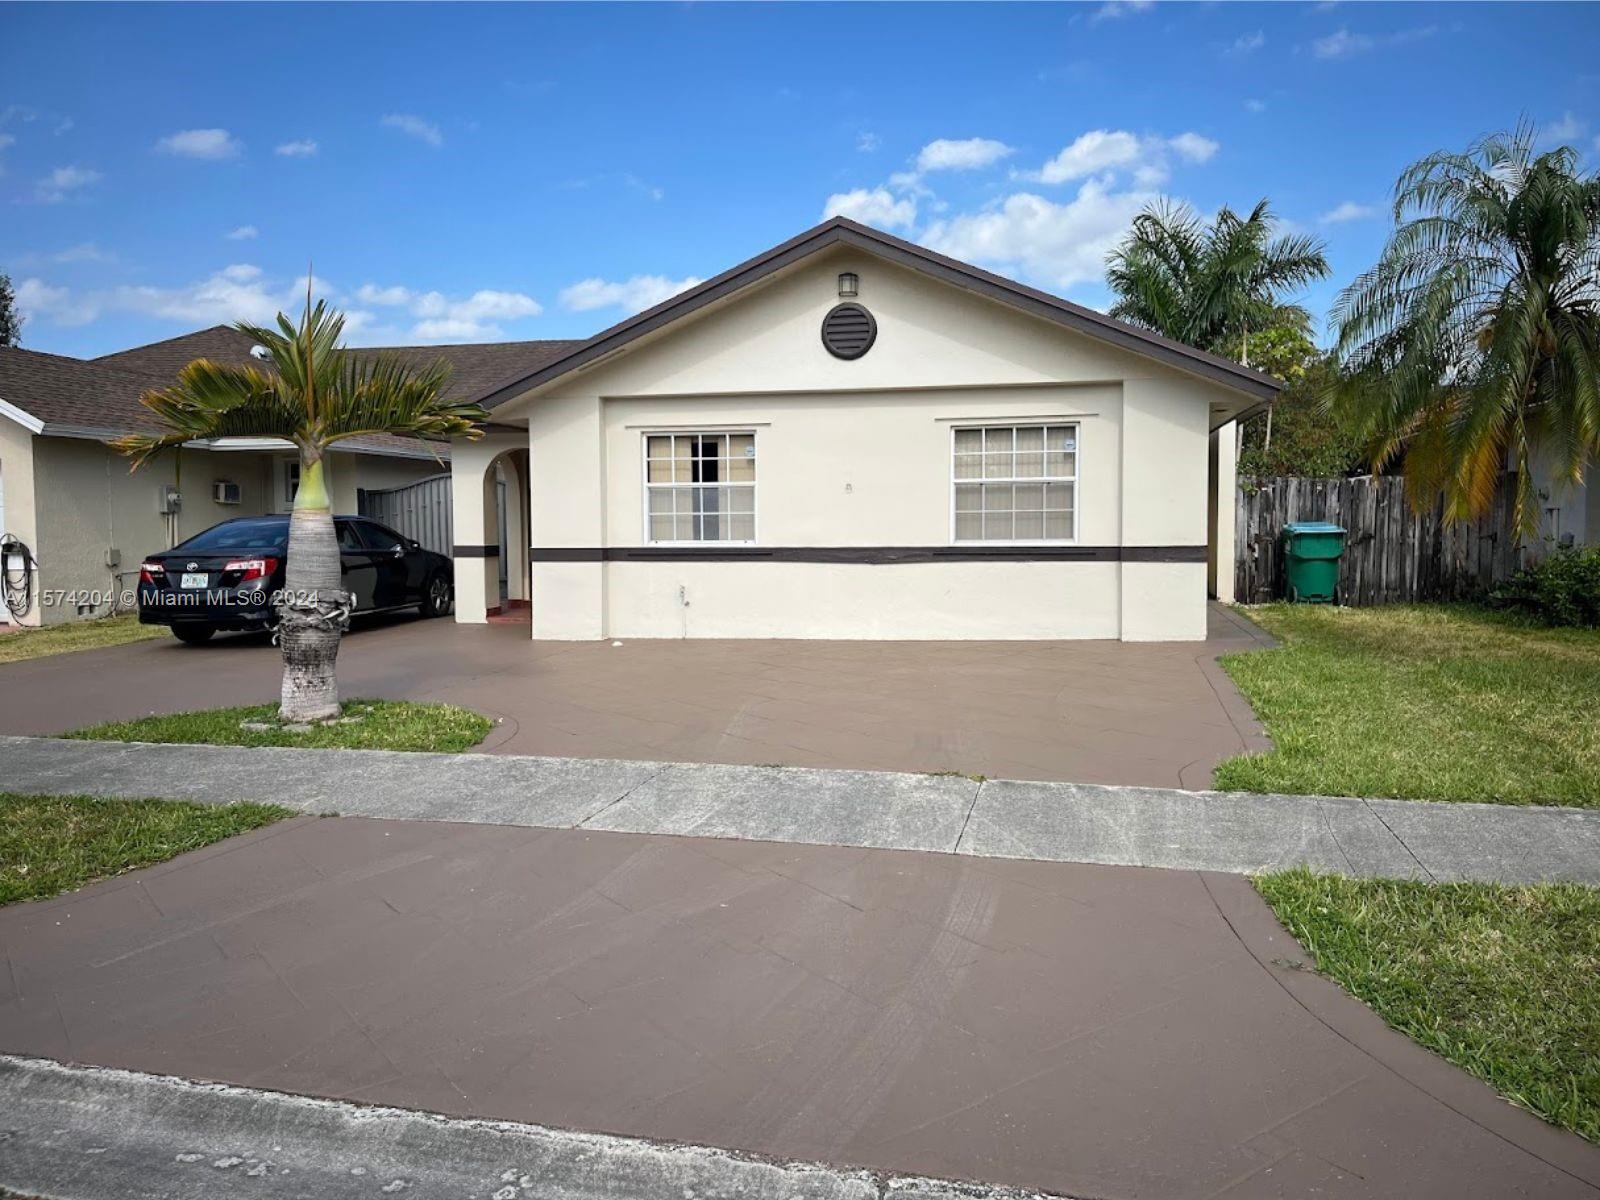 10213 SW 143rd Ave, Miami, Florida 33186, 3 Bedrooms Bedrooms, ,2 BathroomsBathrooms,Residential,For Sale,10213 SW 143rd Ave,A11574204